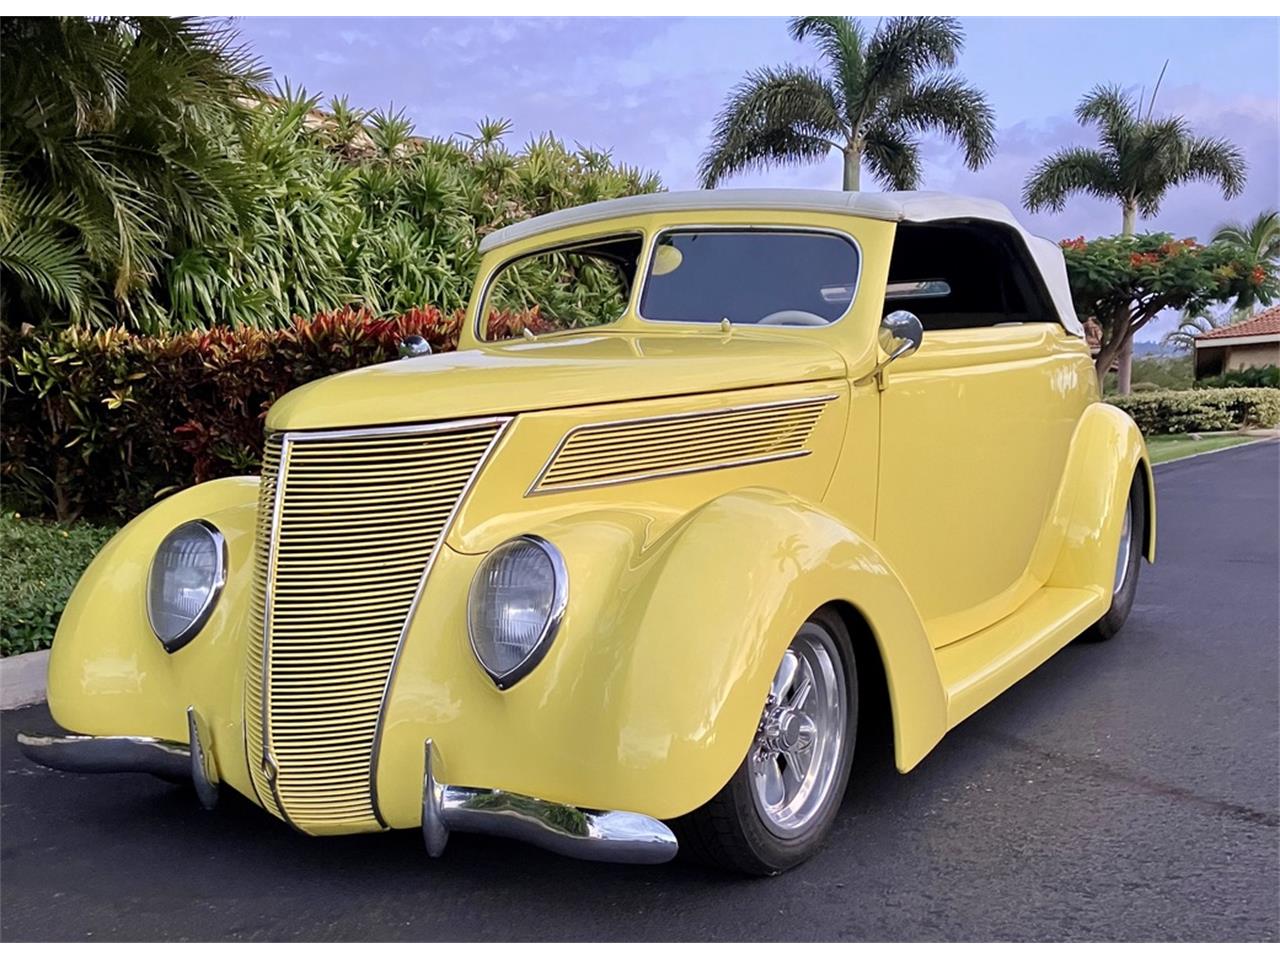 For Sale: 1937 Ford Roadster in Maui, Hawaii for sale in Kula, HI